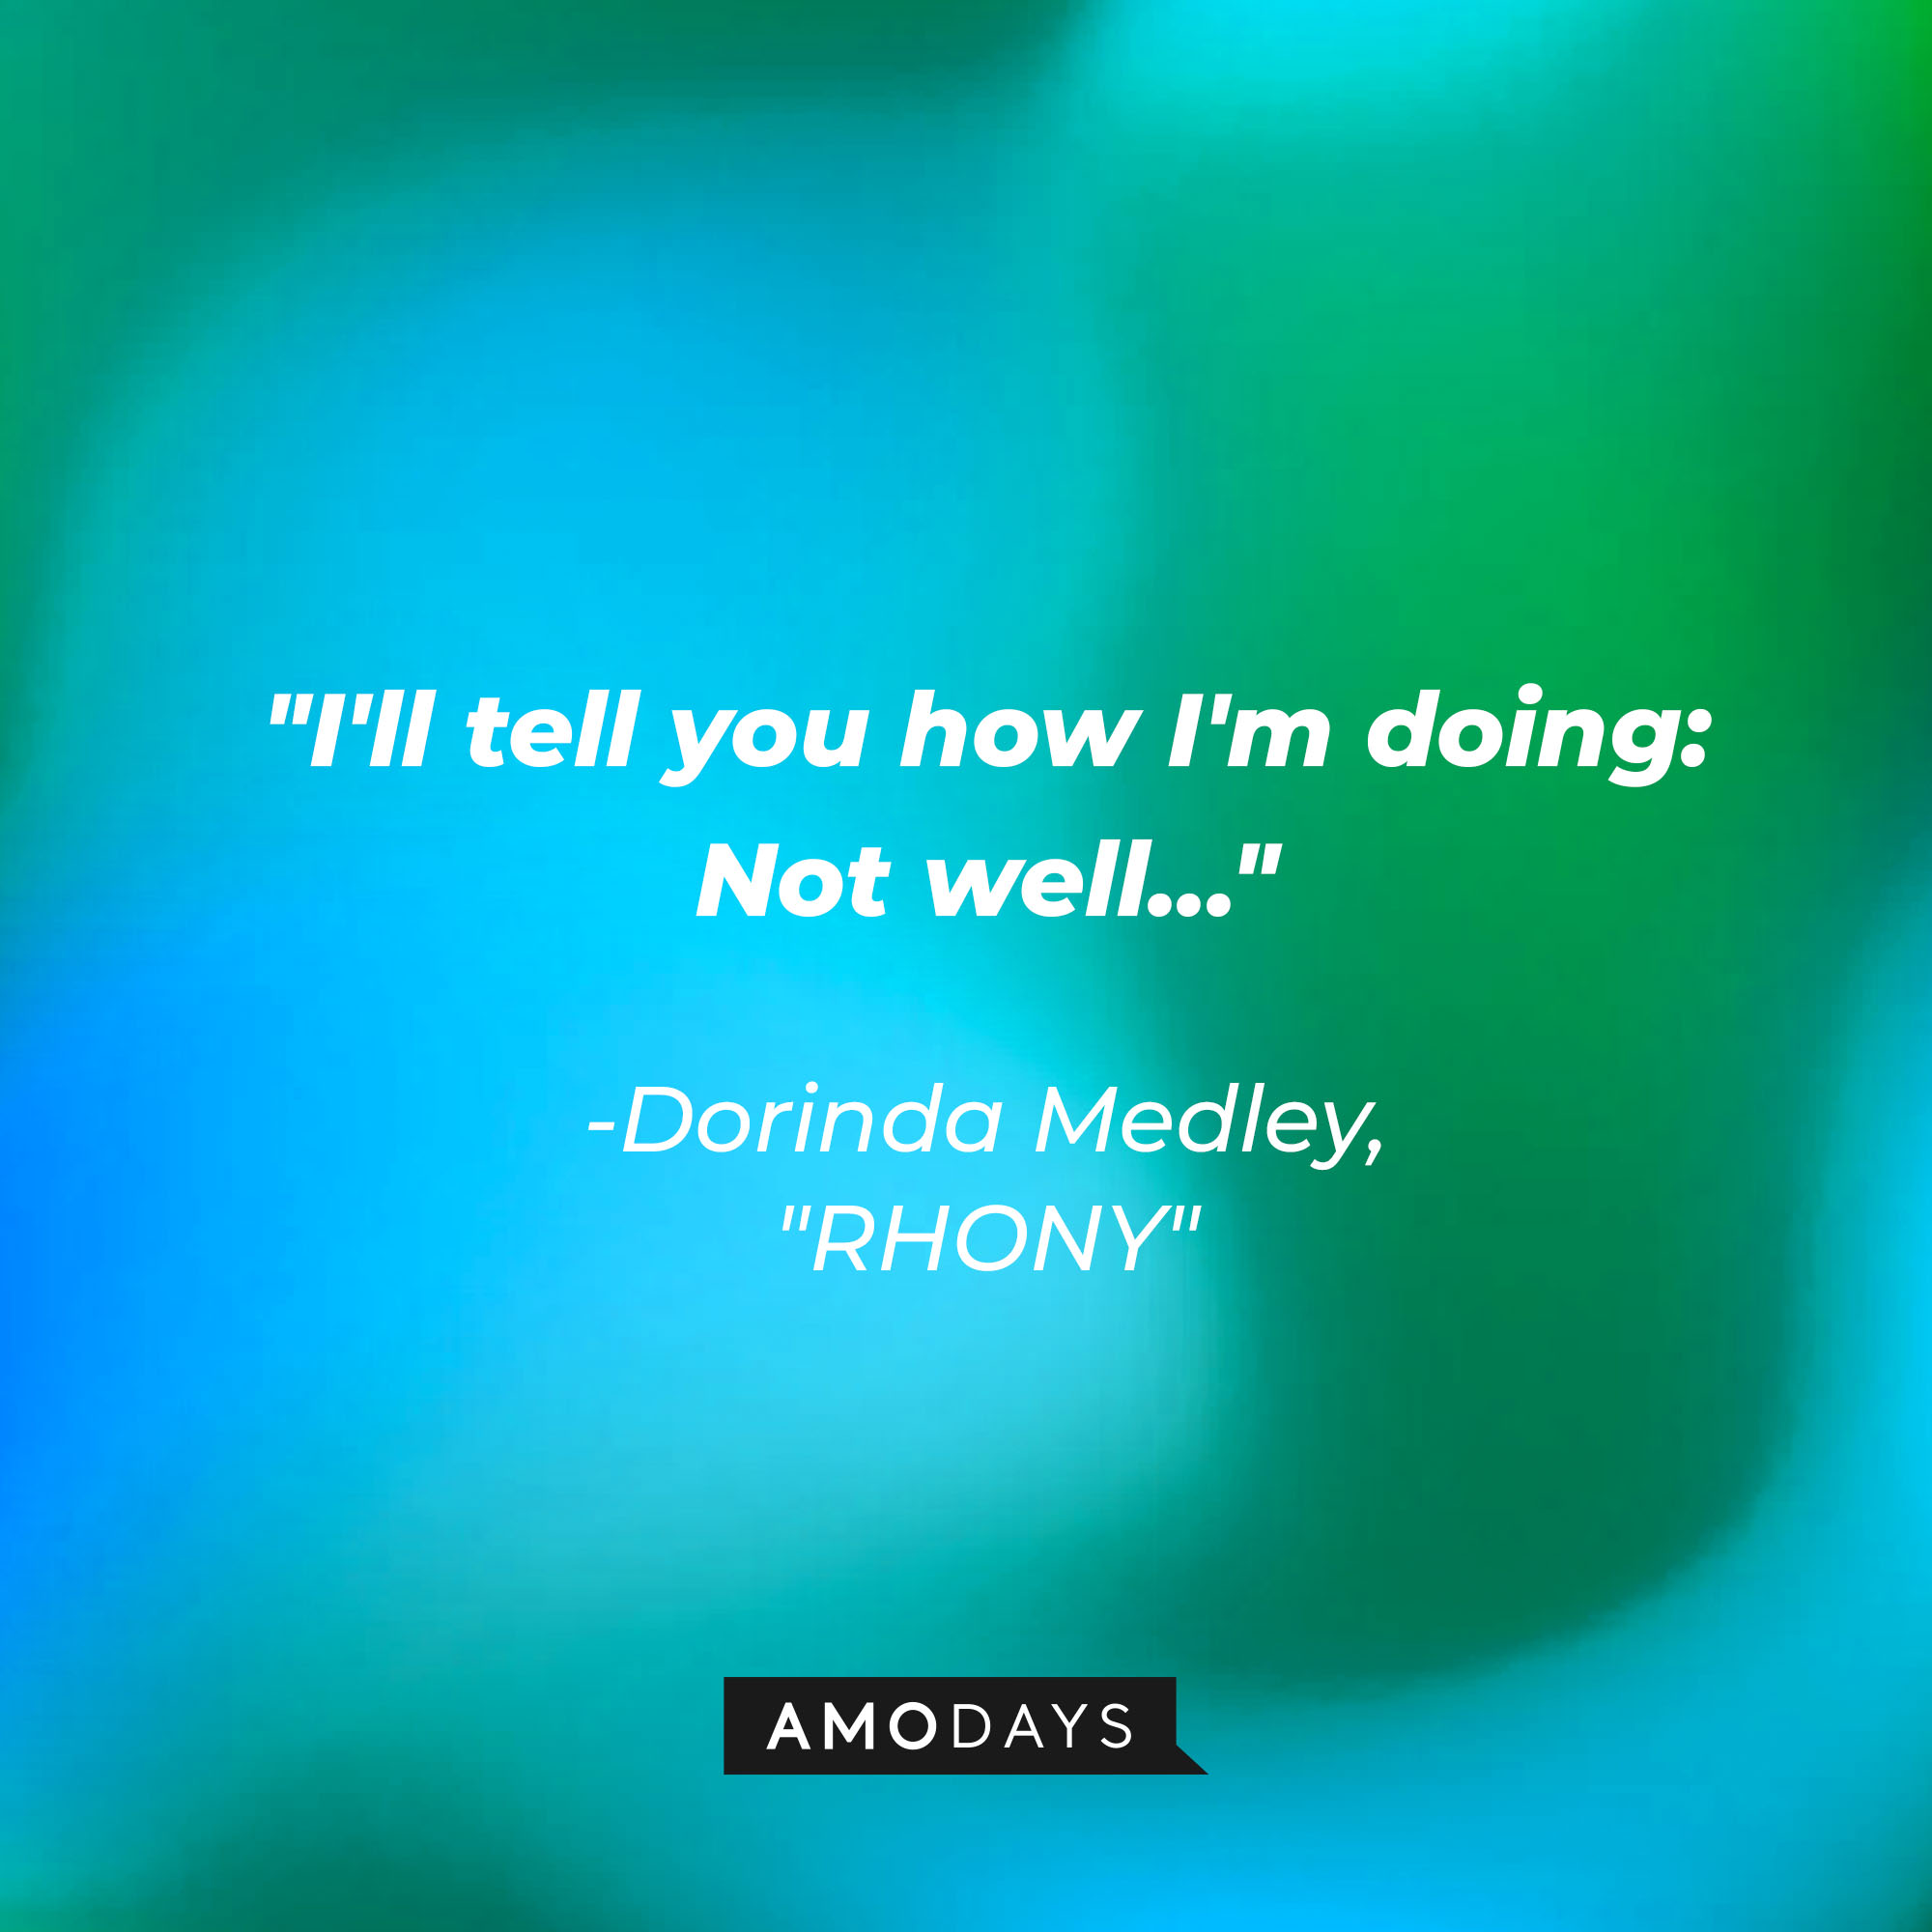 Dorinda Medley's quote: "I'll tell you how I'm doing: Not well..." | Source: Amodays